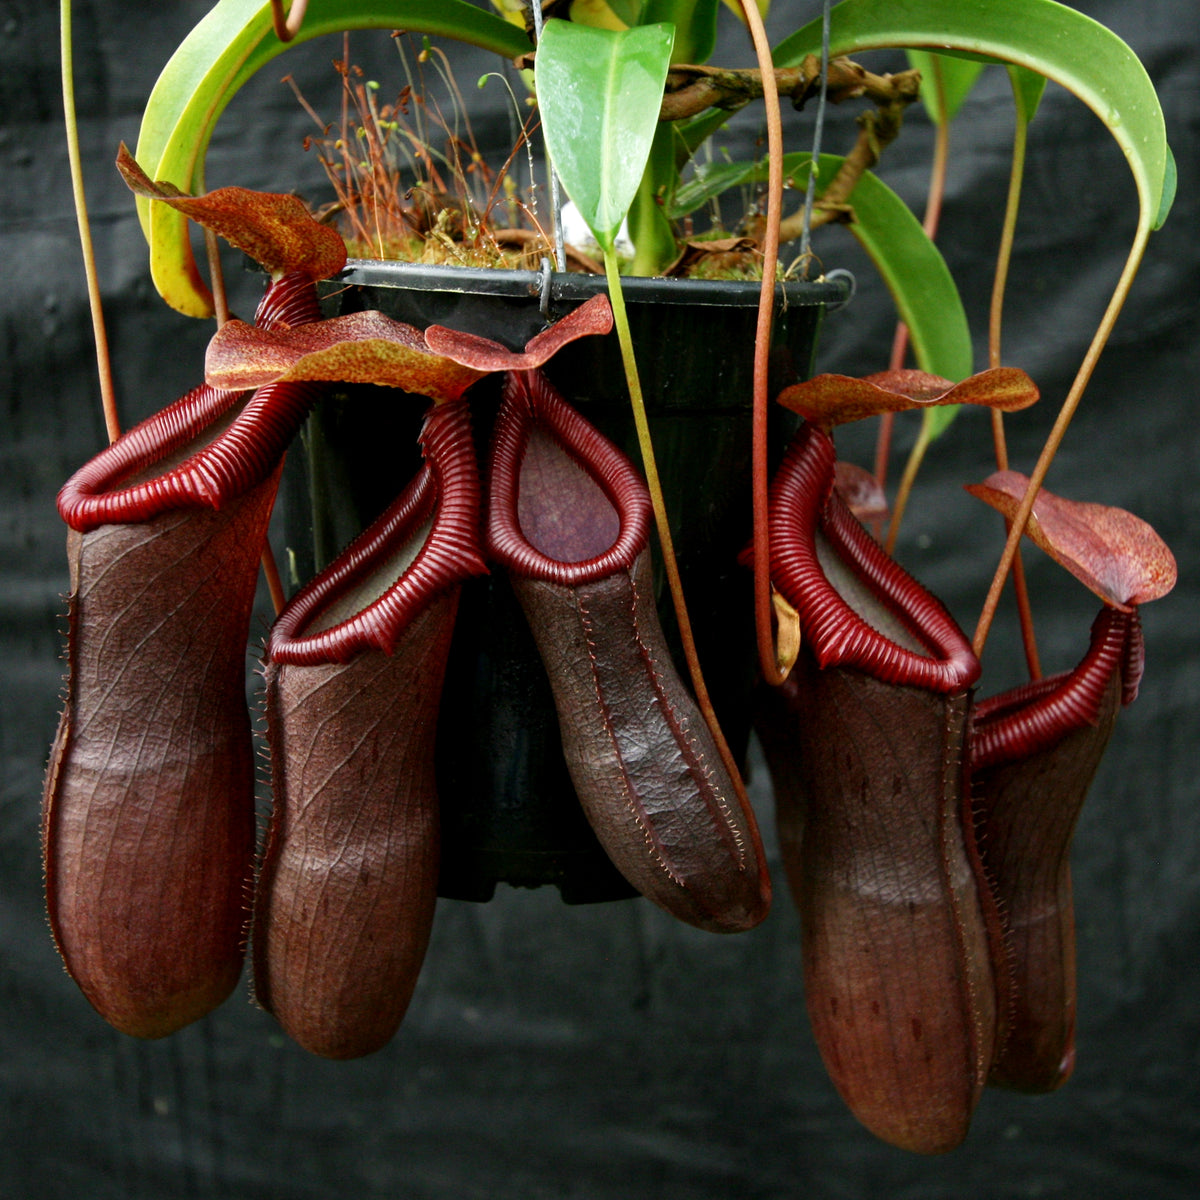 Nepenthes Bill Bailey – nepenthes spp / highland nepenthes